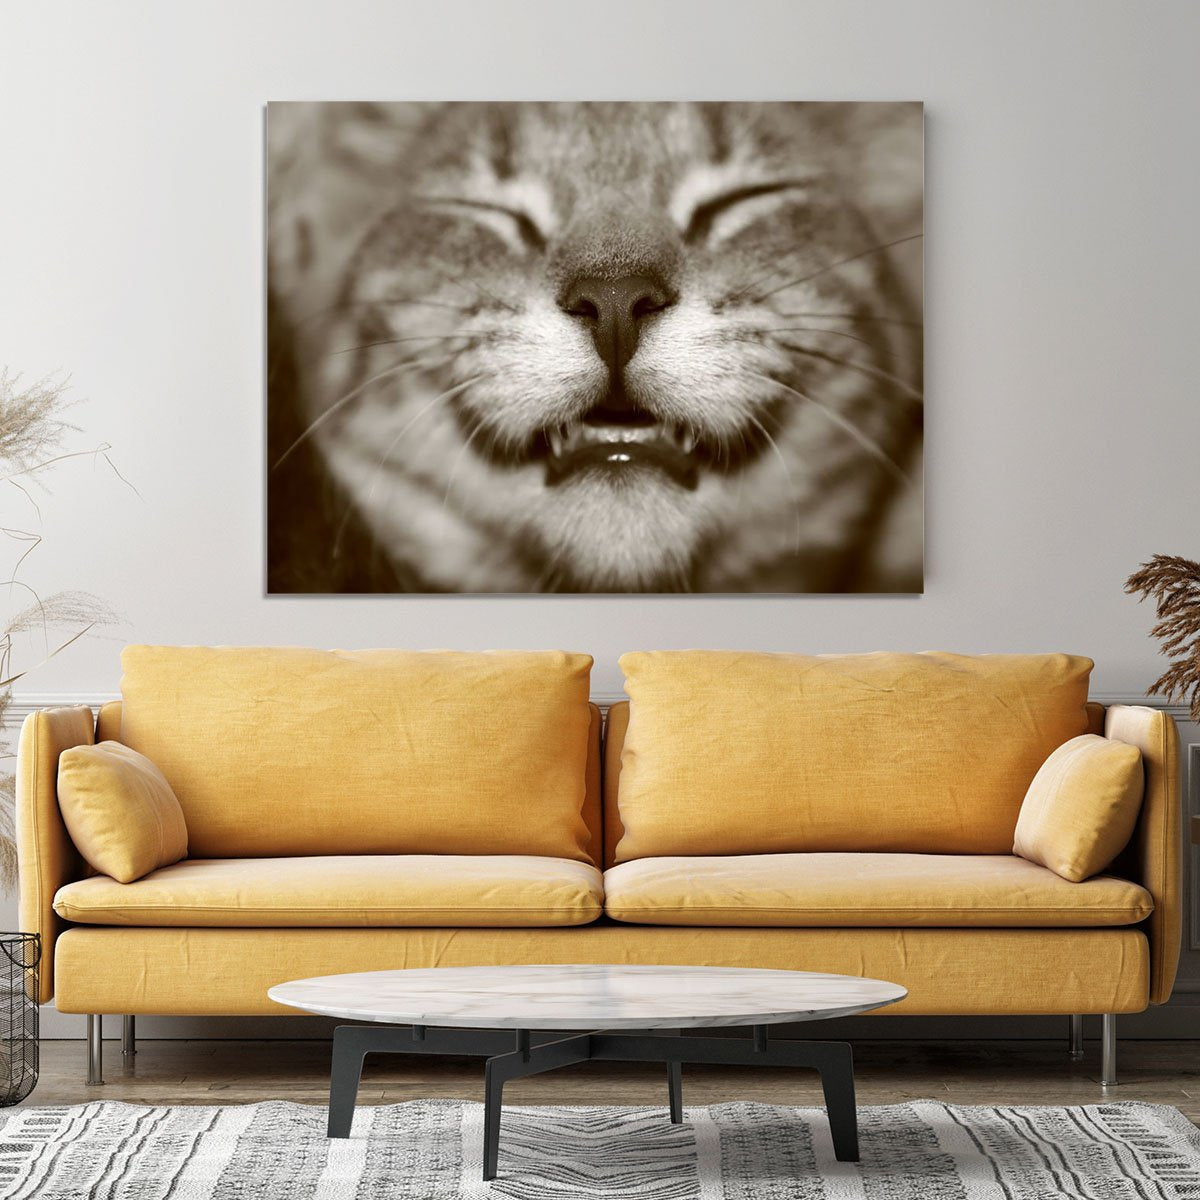 A smiling kitten Canvas Print or Poster